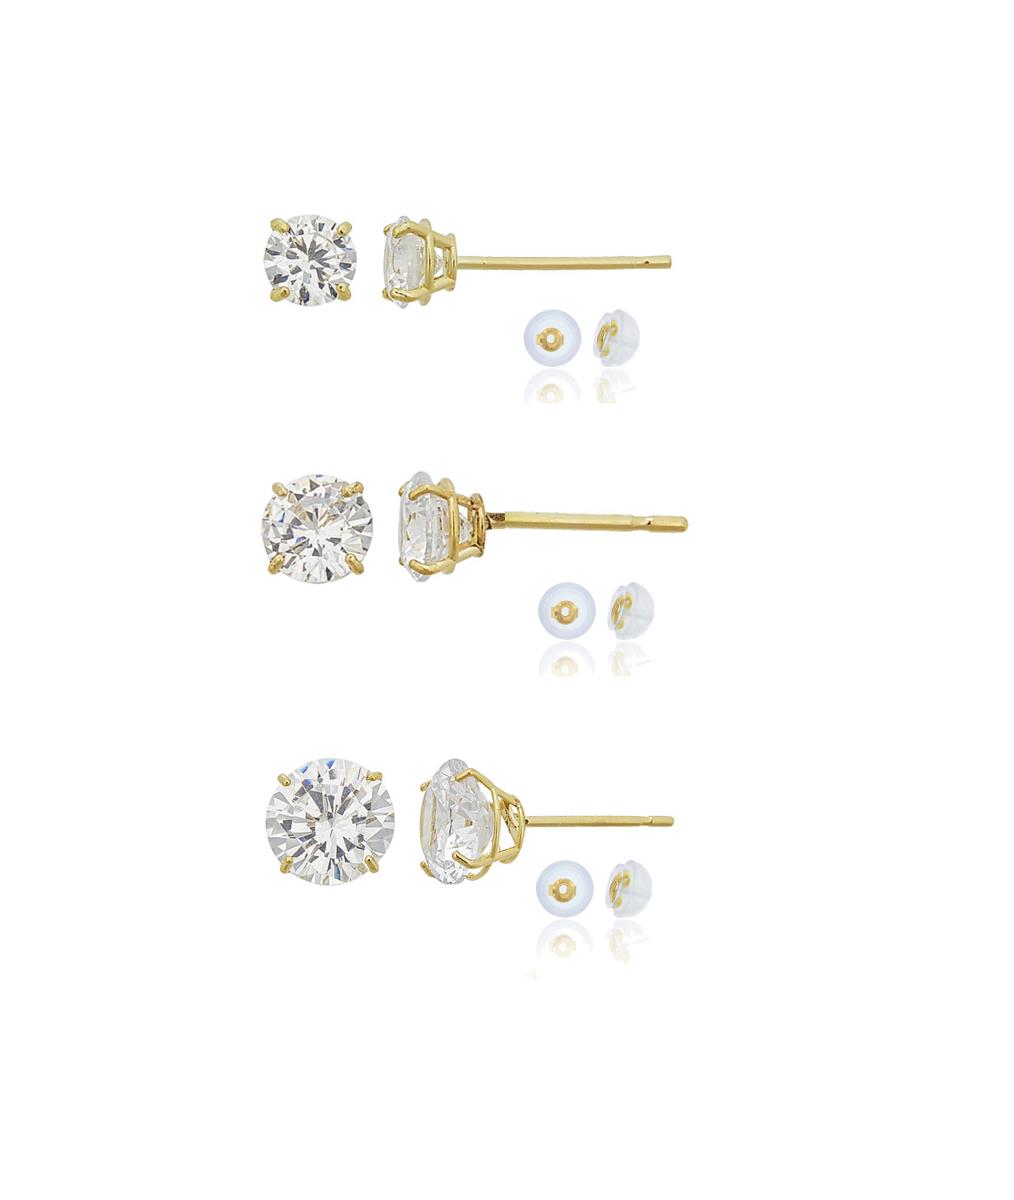 10K Yellow Gold 4mm,5mm,6mm Rd White Swarovski Zirconia 4-Prong Cast Basket Solitaire Earring & Silicone Bubble Back Set Of 3